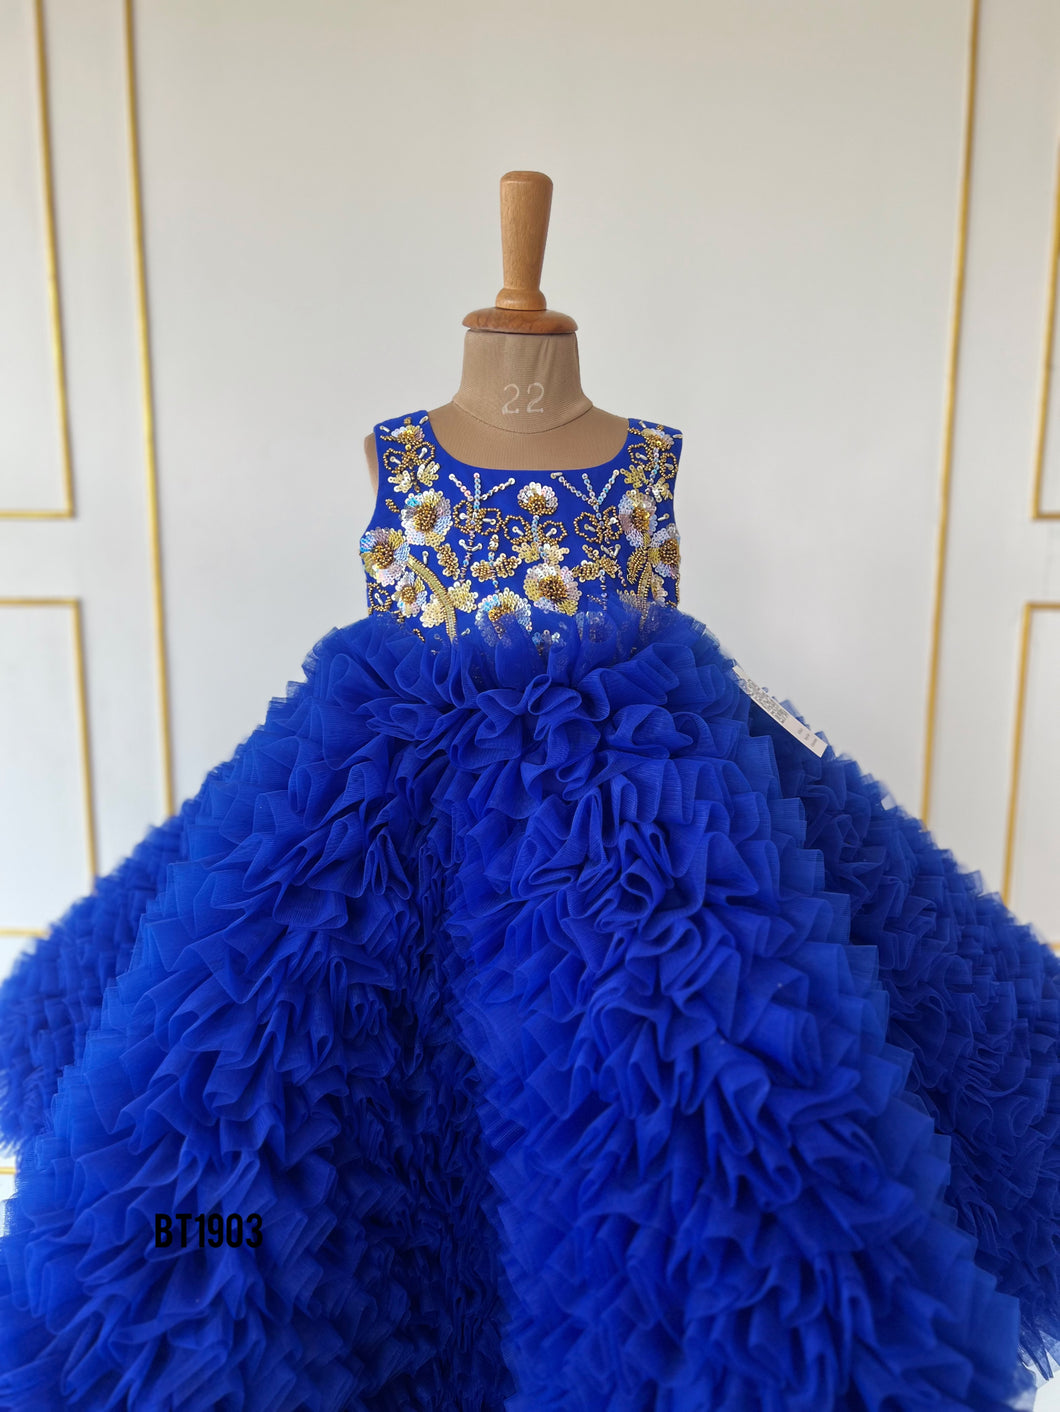 BT1903 Royal Blue Blossom: Luxurious Baby Party Dress